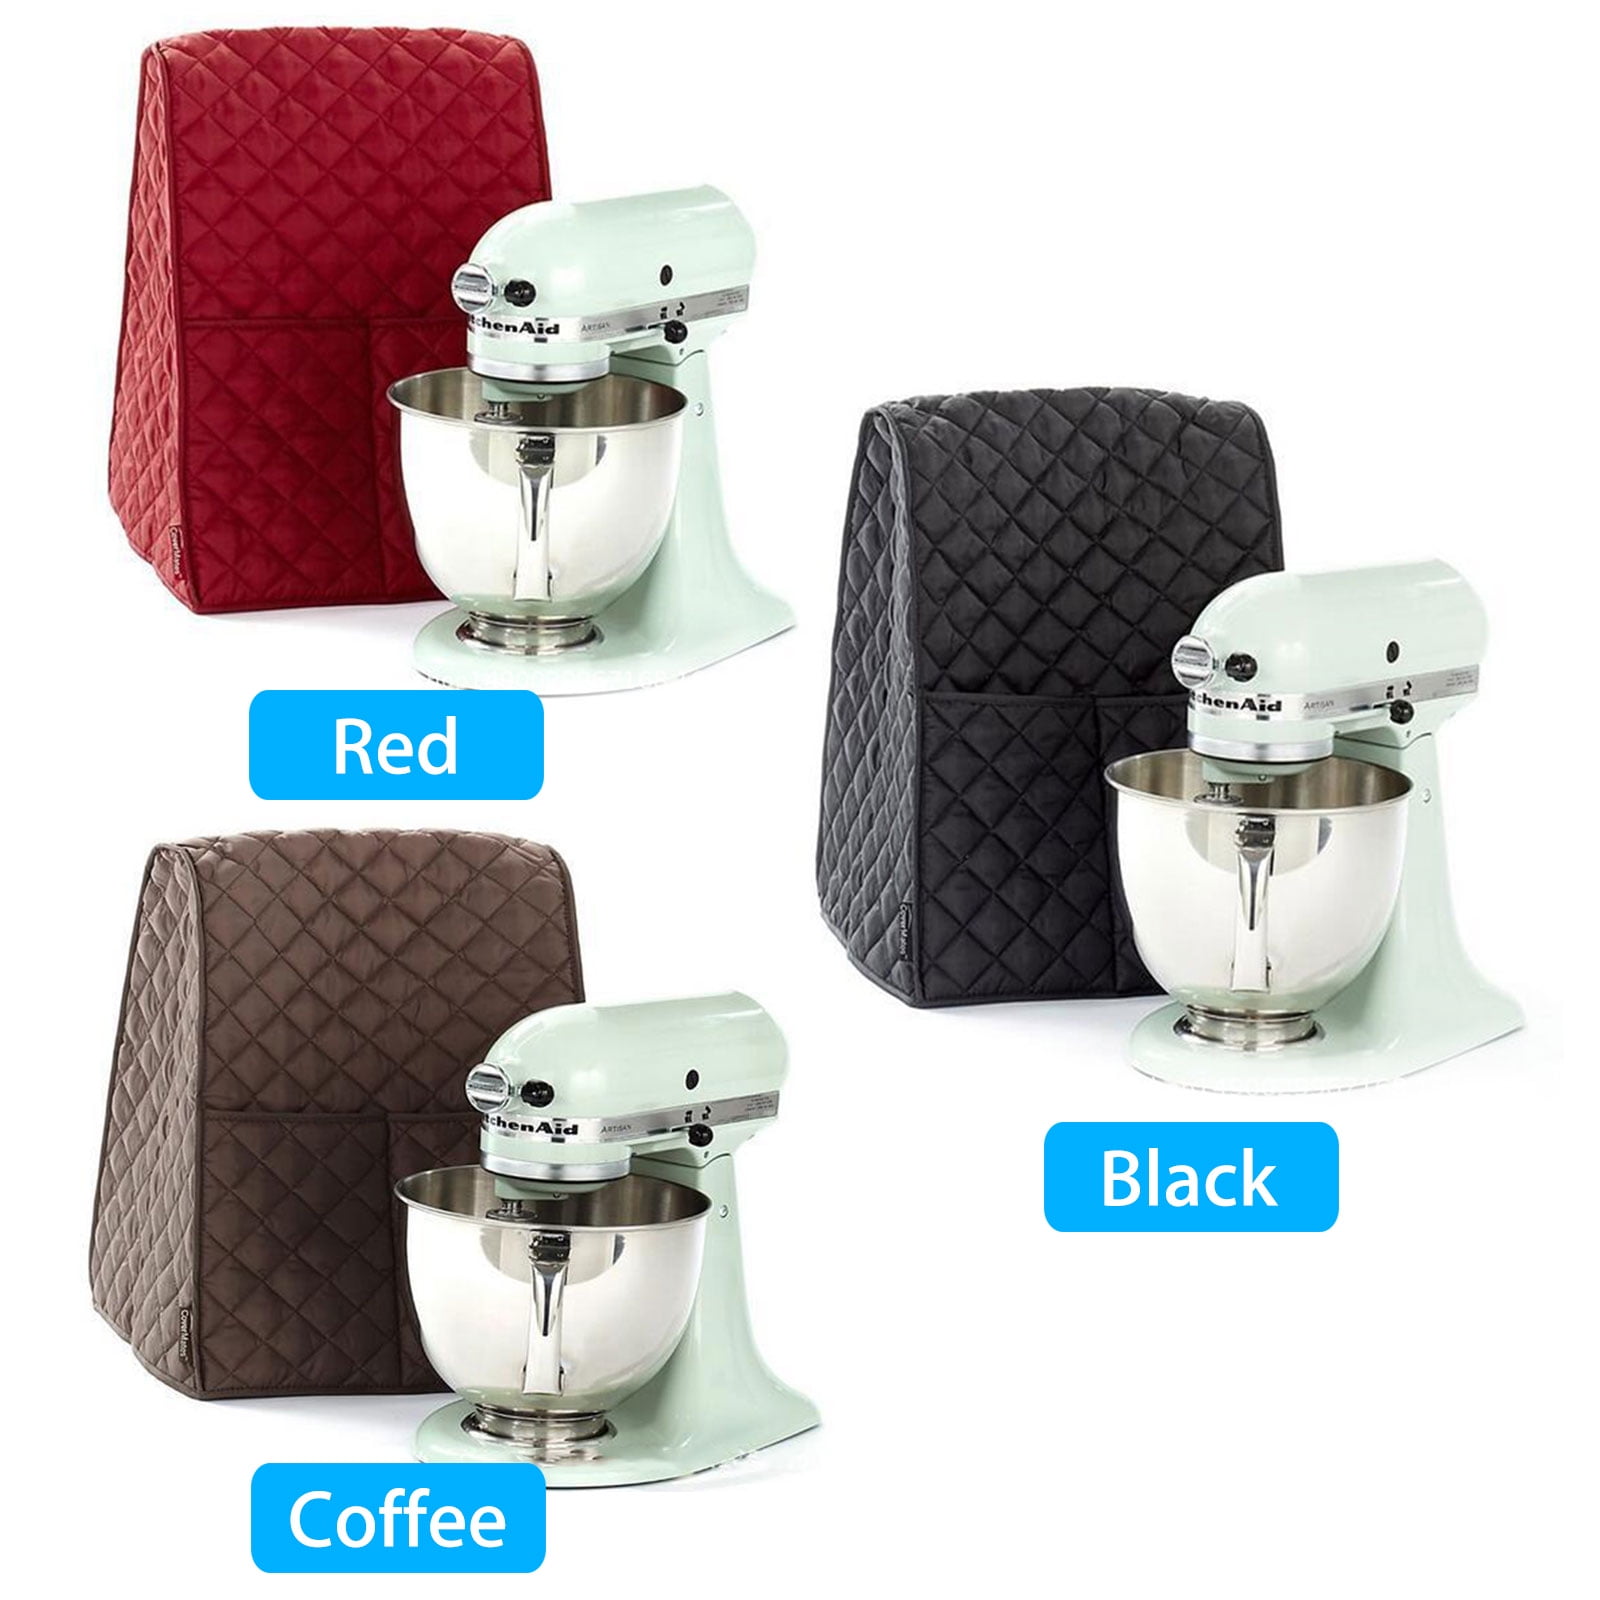 Details about   Home Stand Mixer Cover Dust-proof Organizer Bag For 4-7 qt Kitchen Aid Fitted 